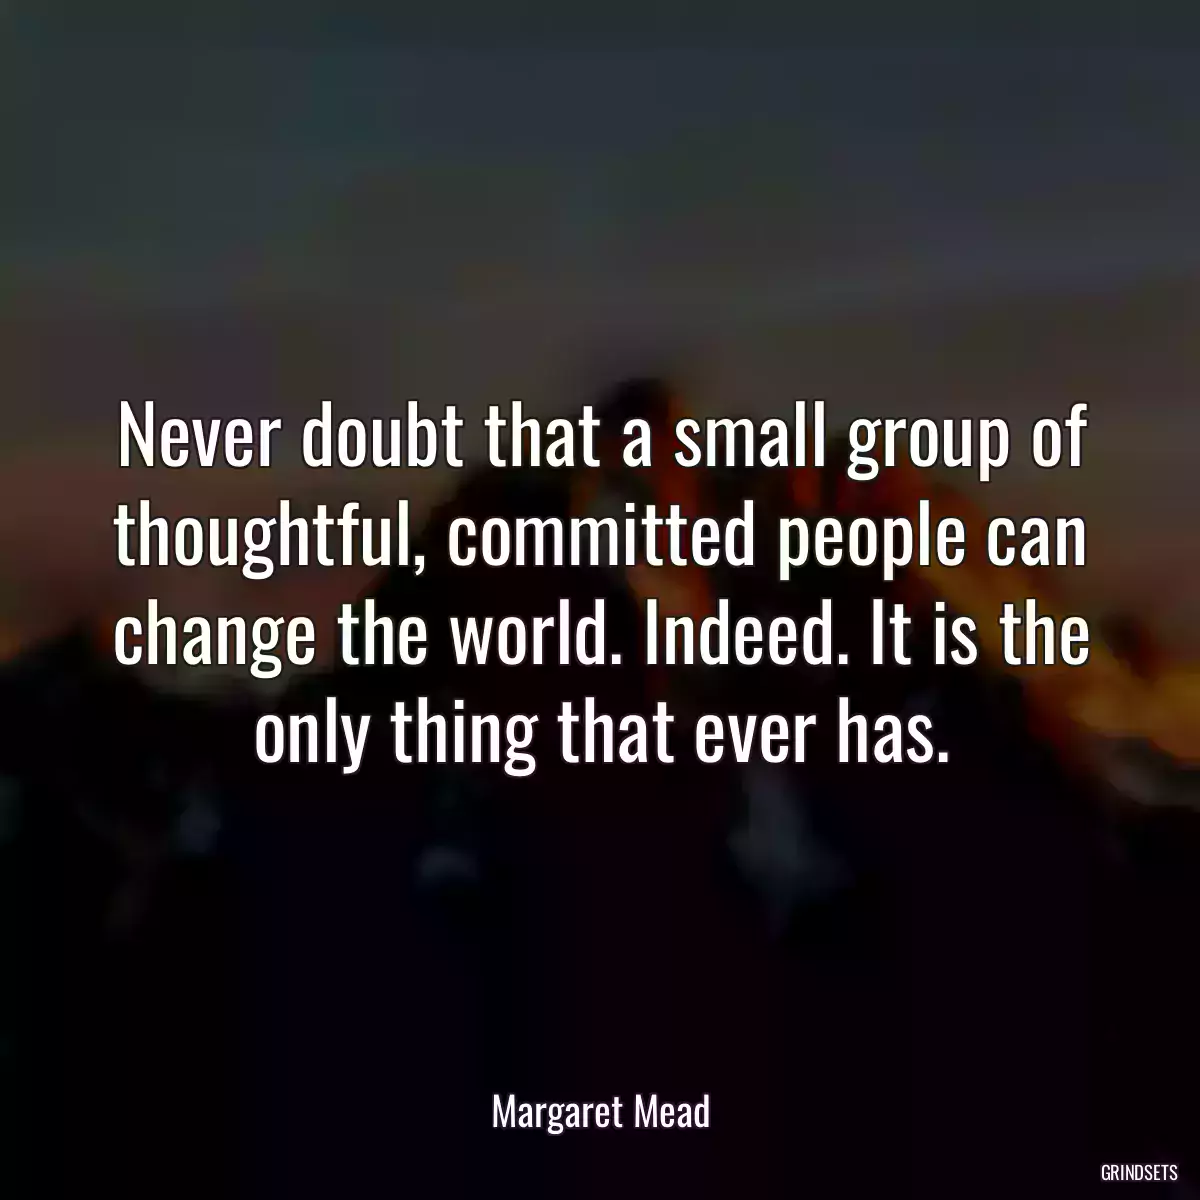 Never doubt that a small group of thoughtful, committed people can change the world. Indeed. It is the only thing that ever has.